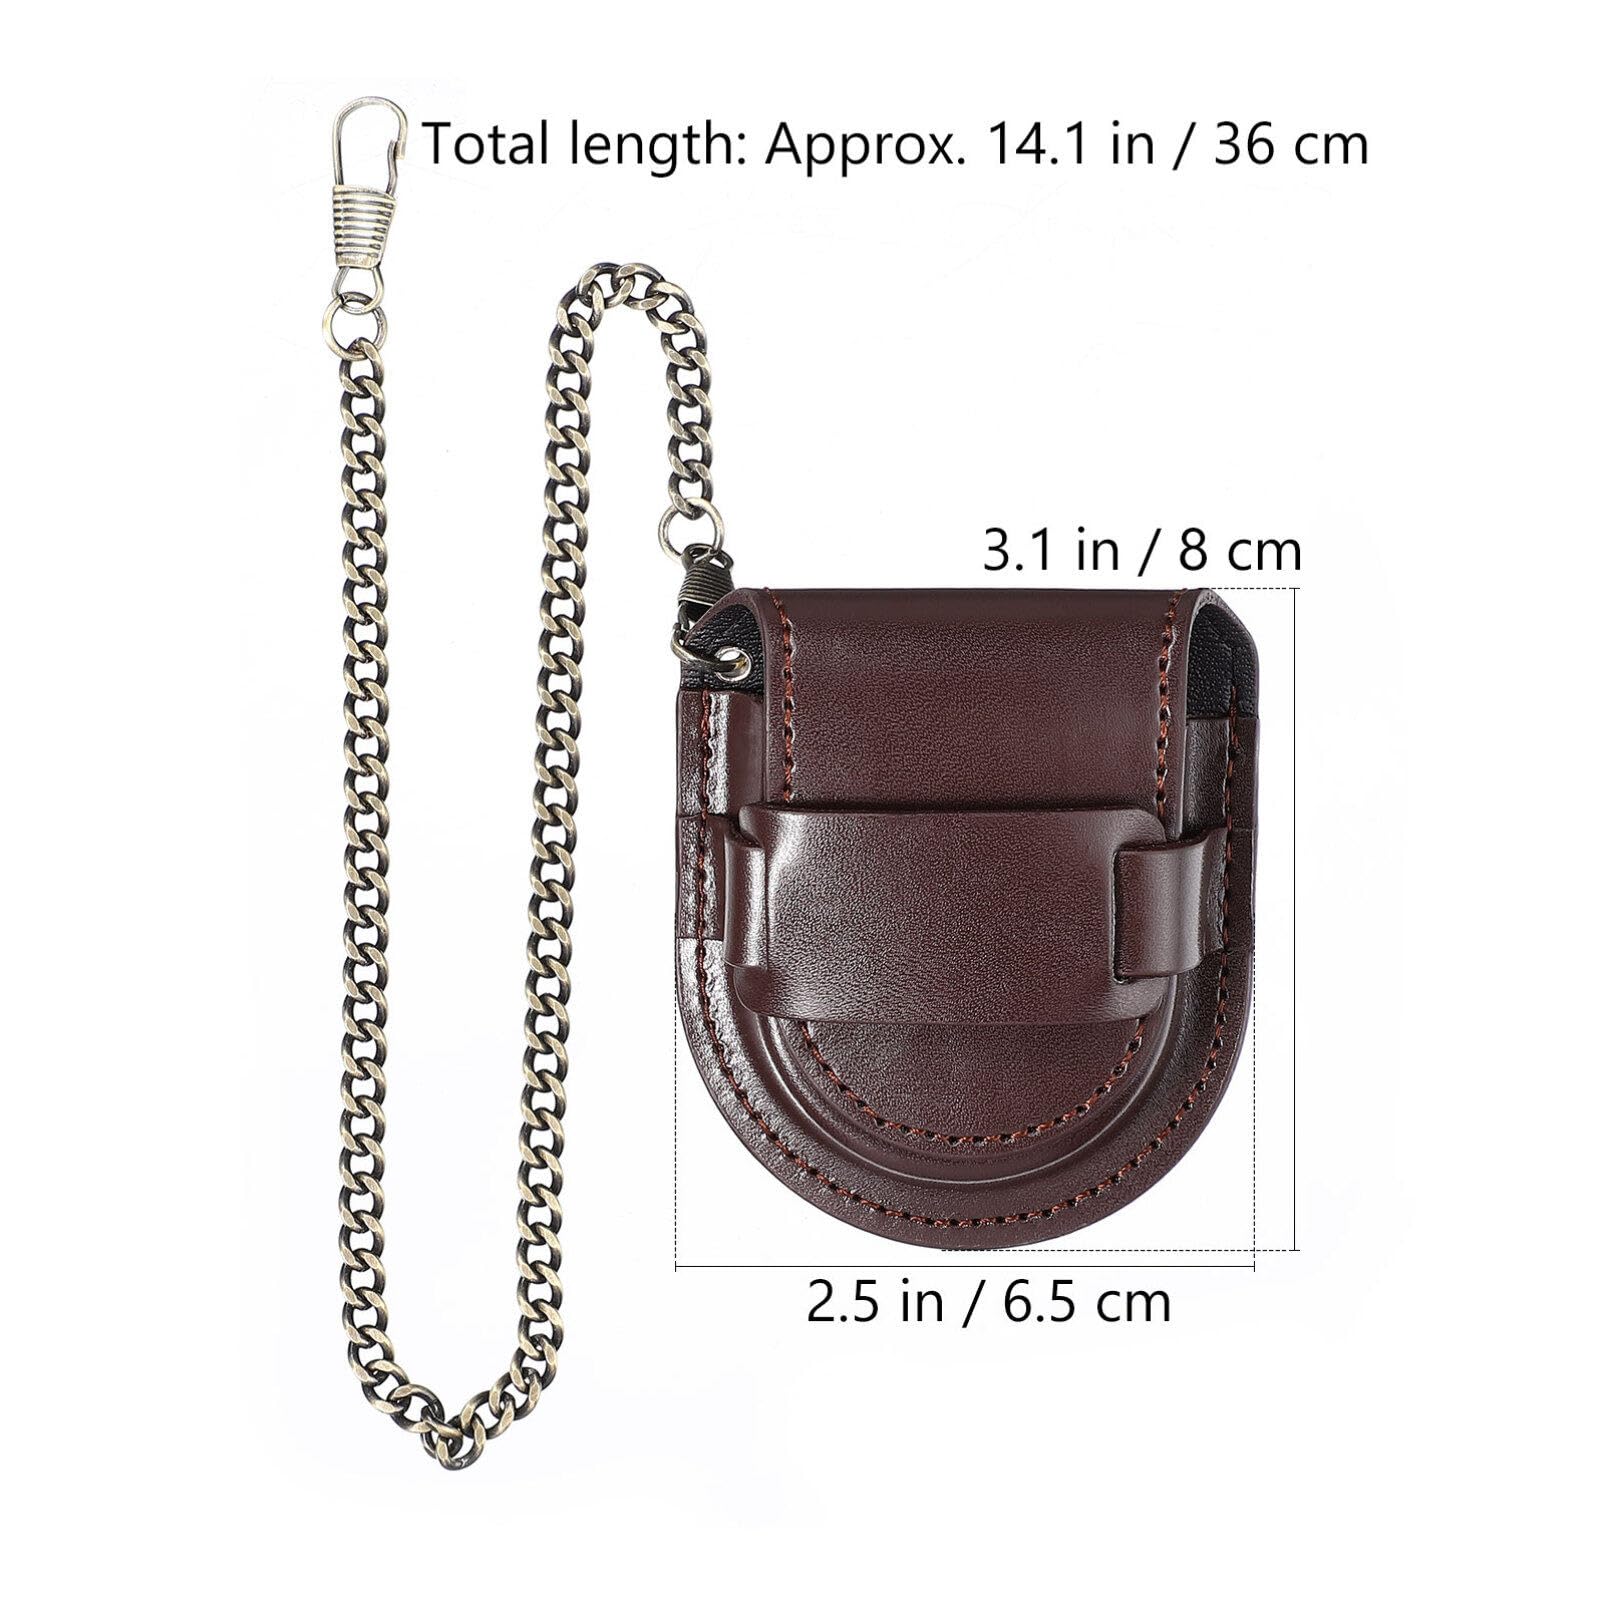 Hemobllo Leather Watch Pouch Pocket Watch Strap Band Watch Holder Protector with Bronze Chain